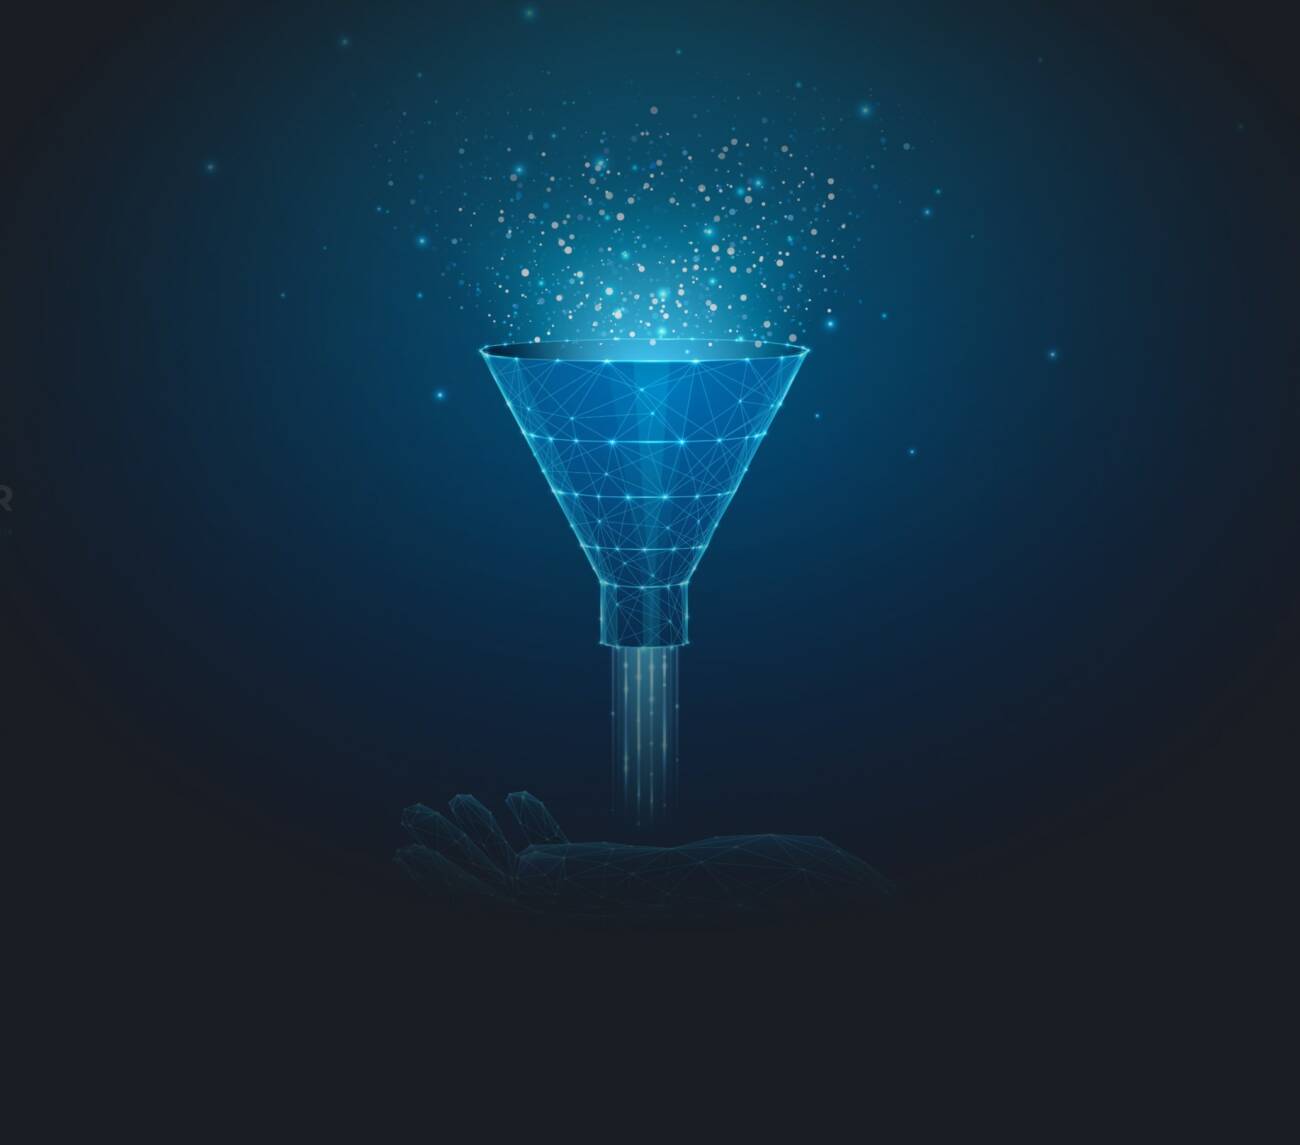 Illustration depicting data particles going through a funnel into the palm of a hand.